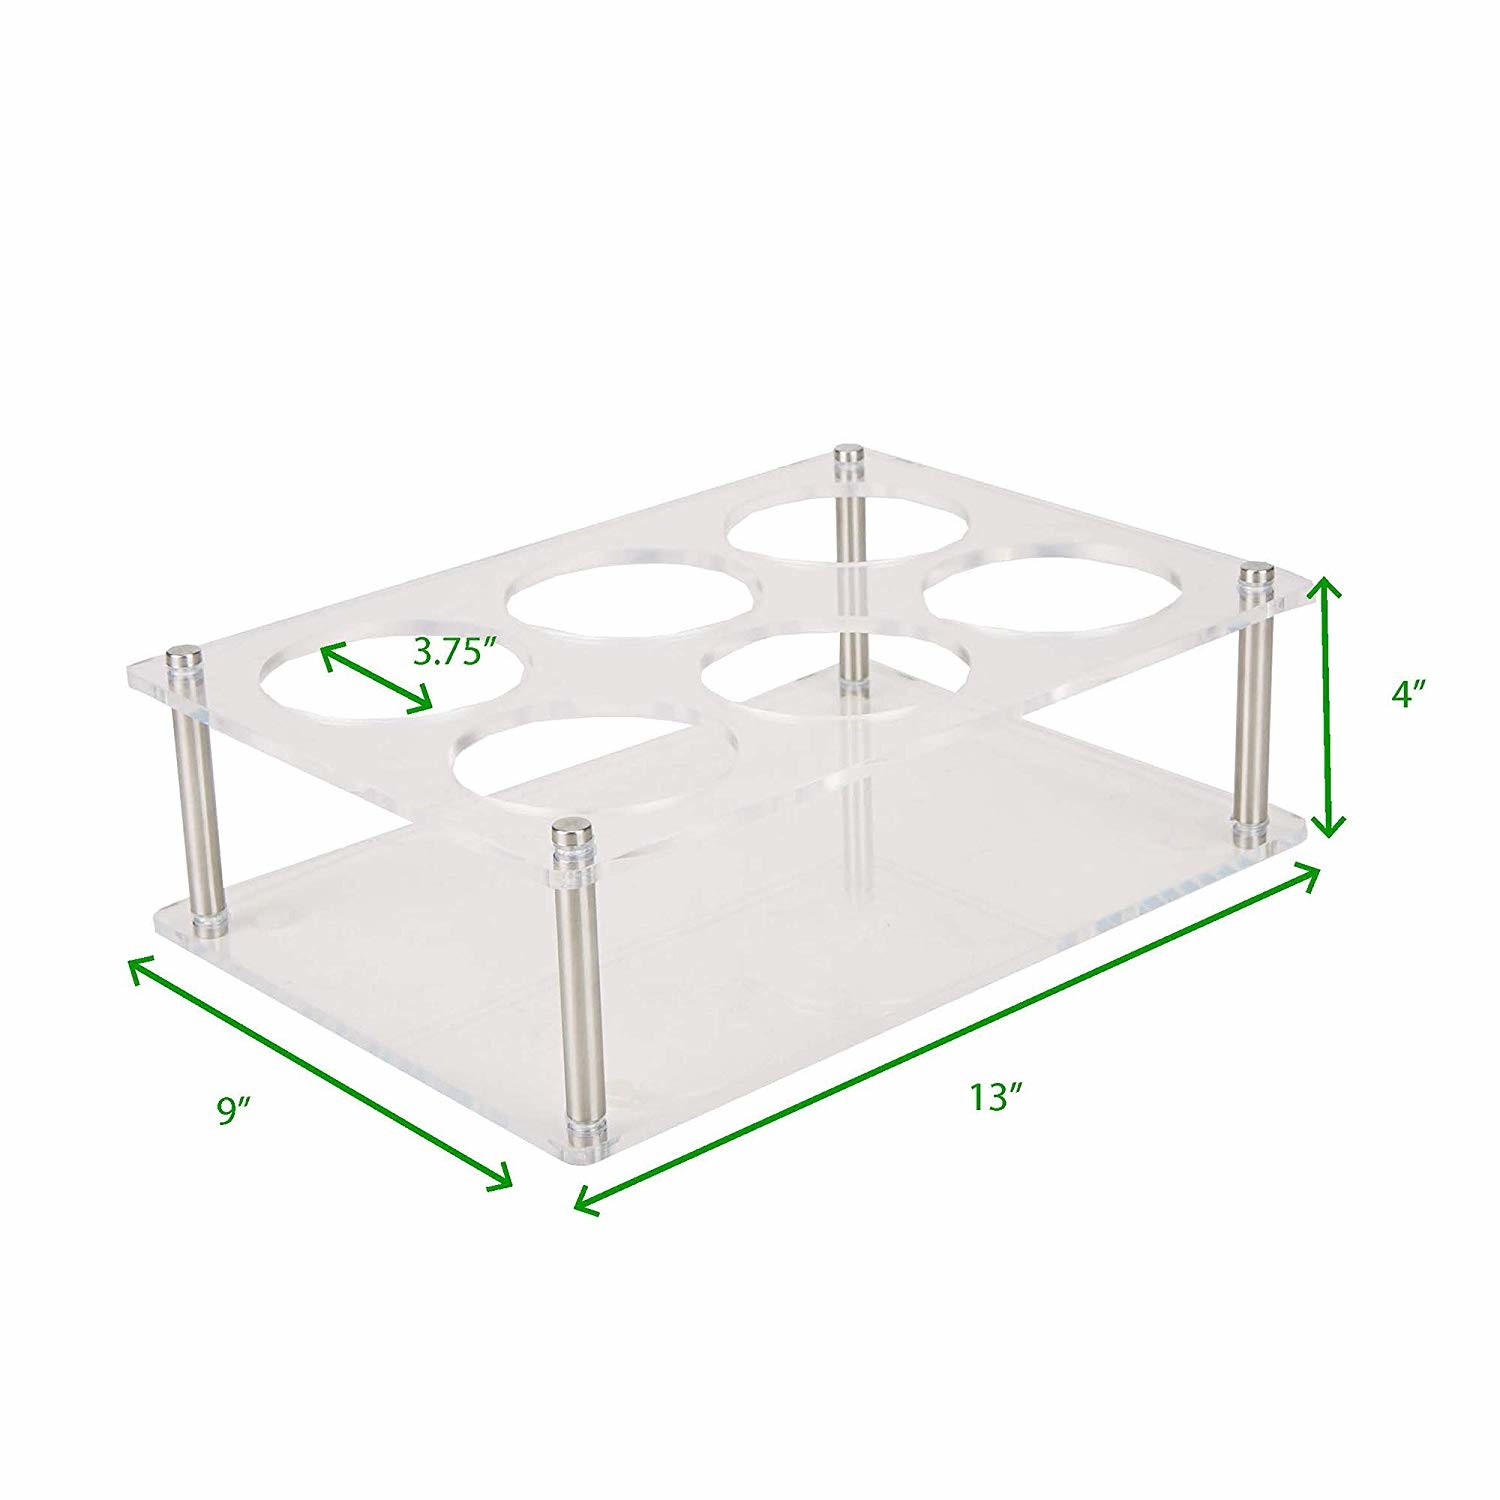 Wholesale 6 Compartment Acrylic Bottle Rack Stand Transparent Chemical Resistance from china suppliers